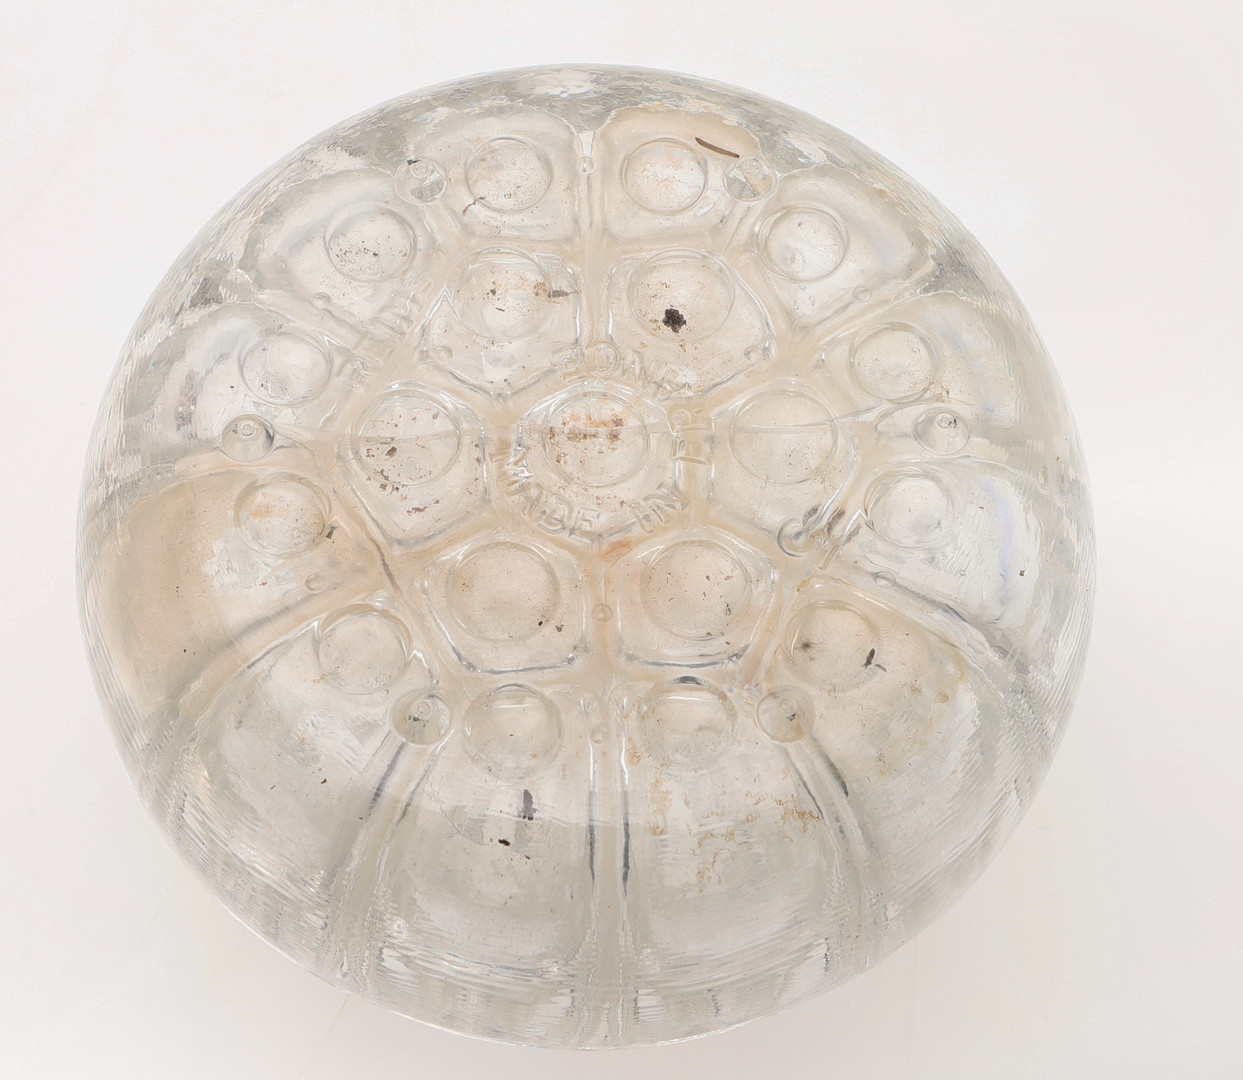 A LATE 19TH/ EARLY 20TH CENTURY CONTINENTAL GLASS MOUNTED SILVER TABLE DECORATION. - Image 6 of 6